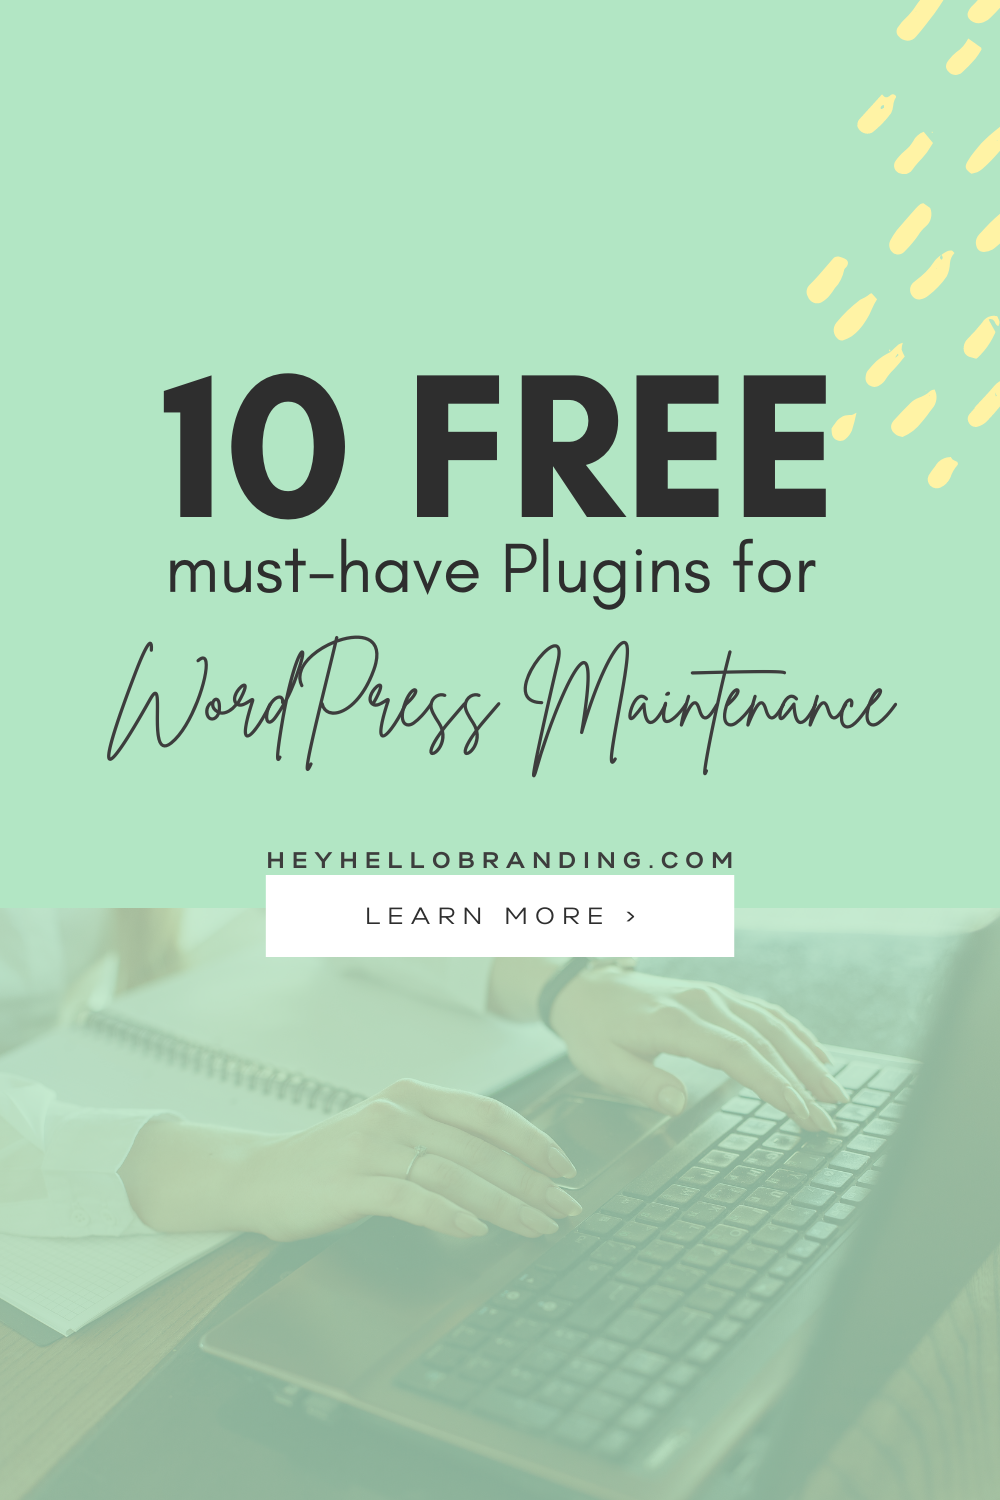 10 free must-have Plugins for WordPress